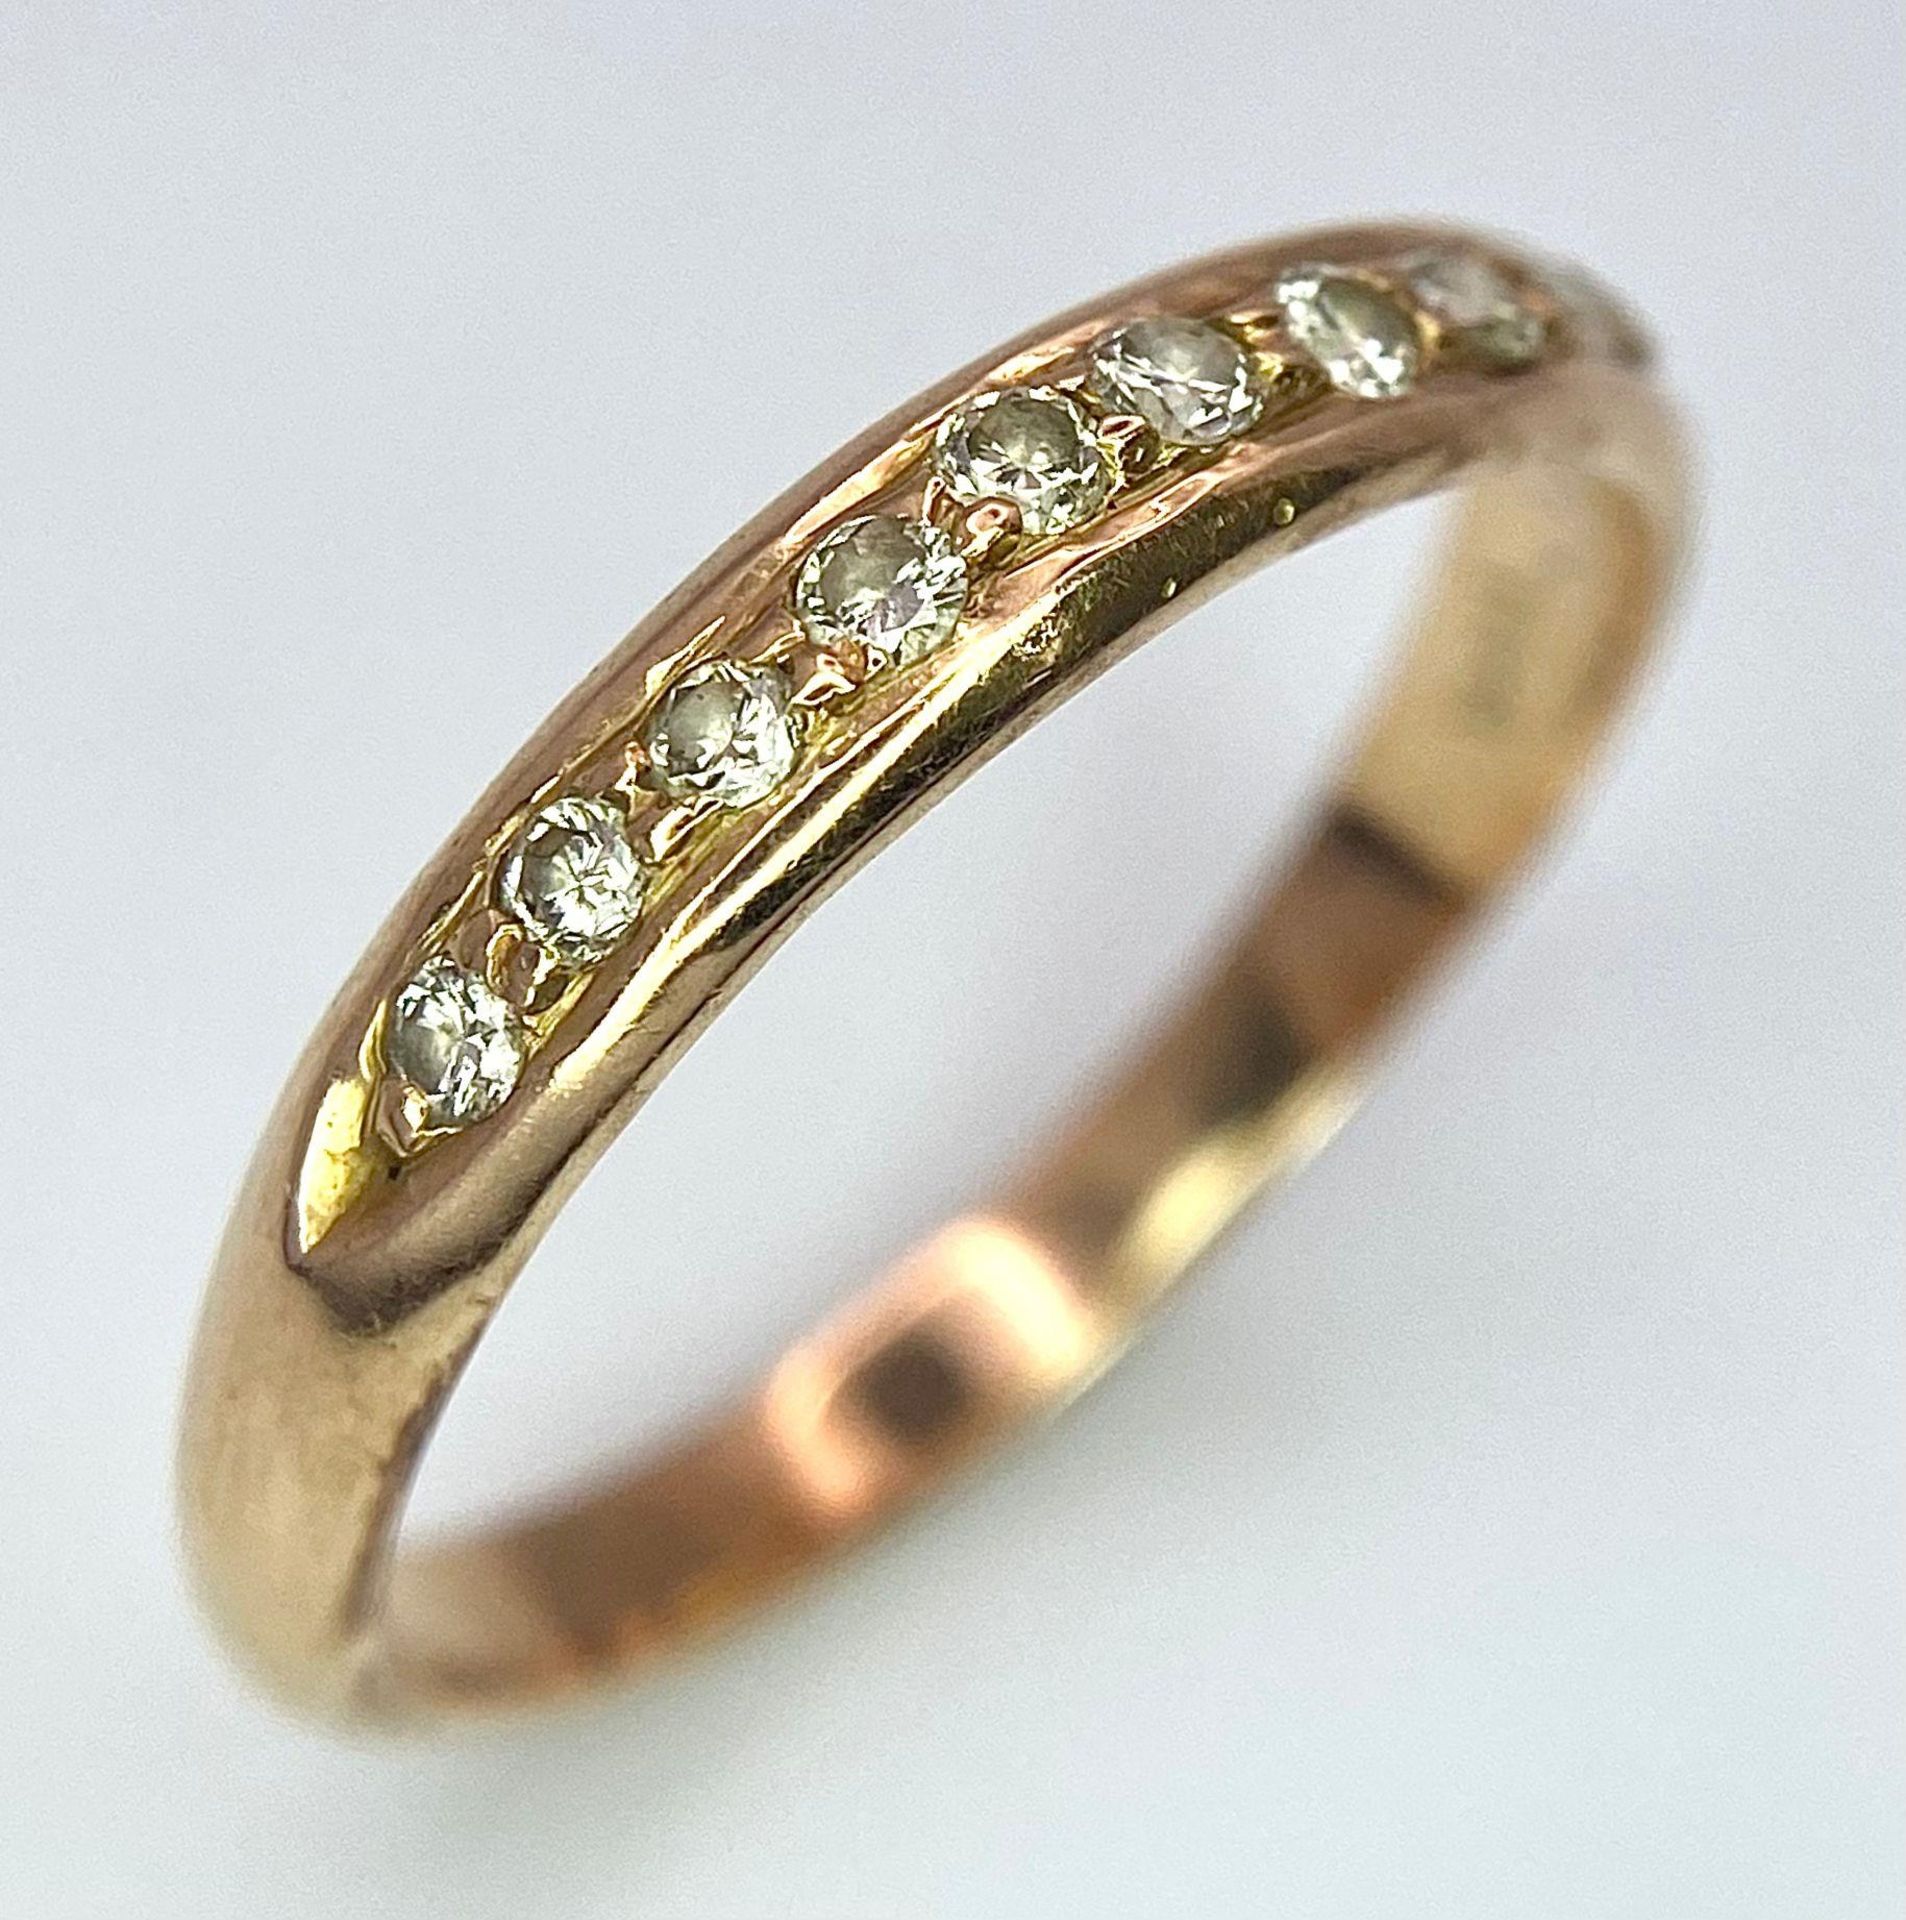 A 14k Yellow Gold Diamond Half Eternity Ring. Size N. 2.1g total weight.